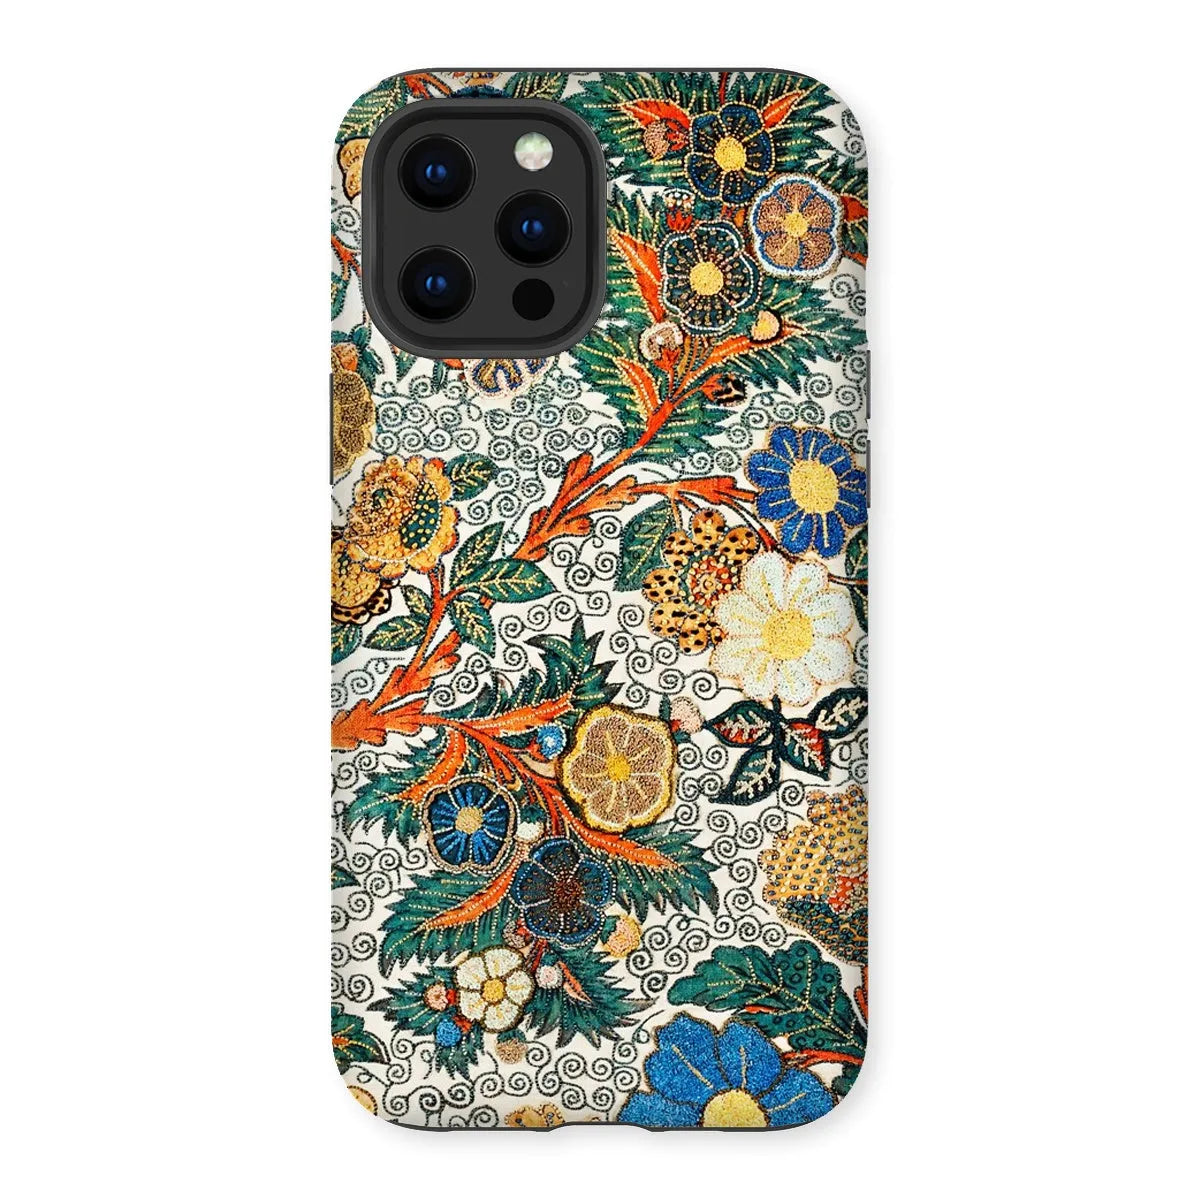 Blossomewhere Japanese Tapestry Art Phone Case - Iphone 13 Pro Max / Matte - Mobile Phone Cases - Aesthetic Art